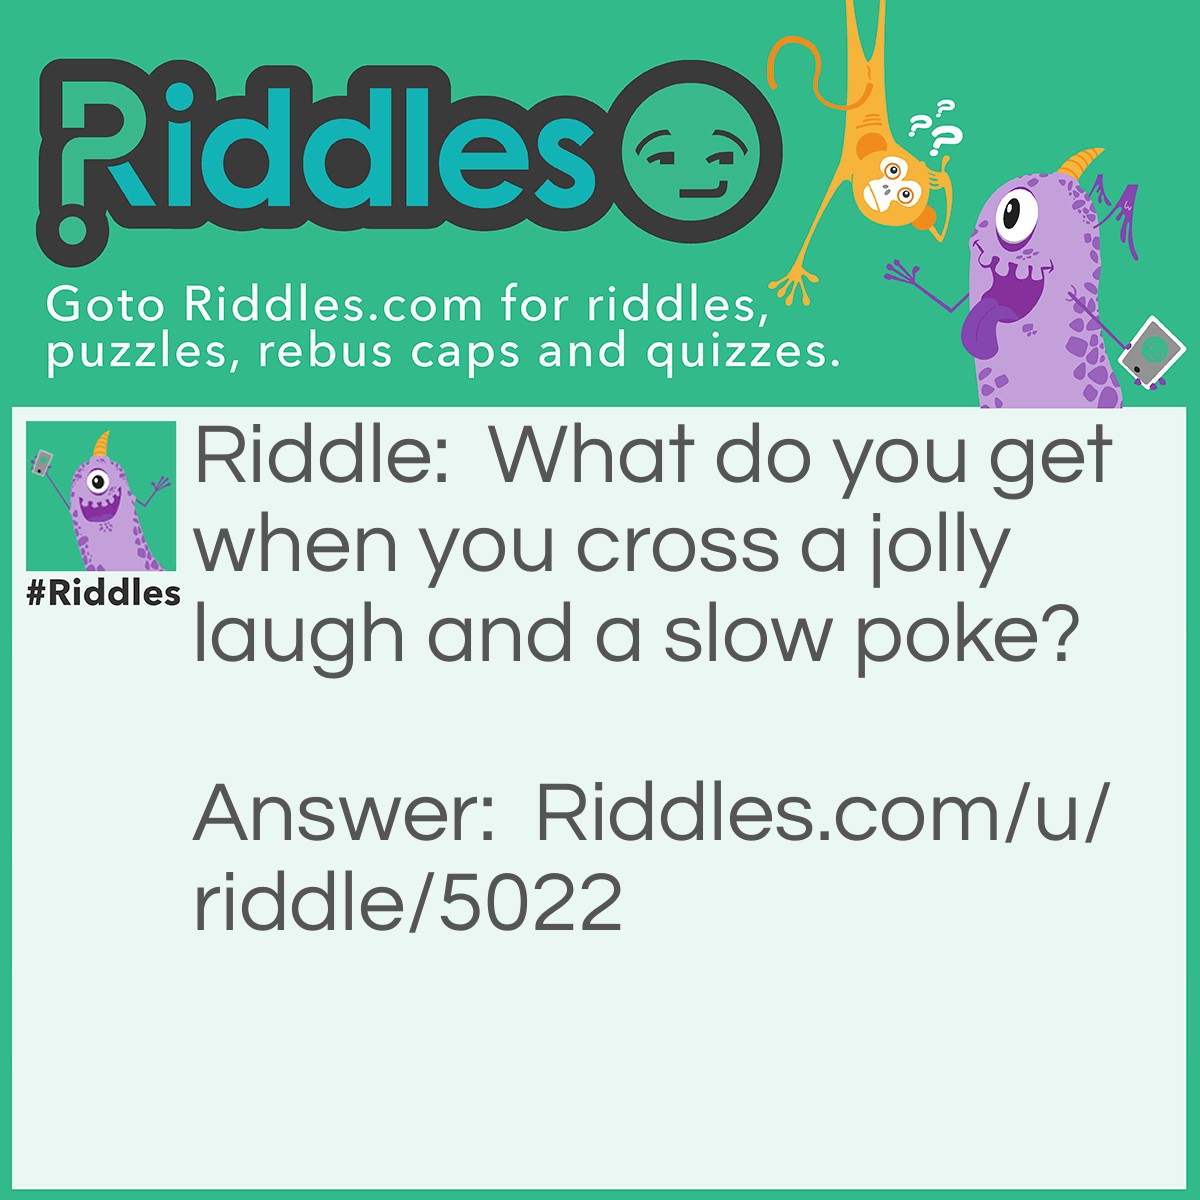 Riddle: What do you get when you cross a jolly laugh and a slow poke? Answer: A slow joke!